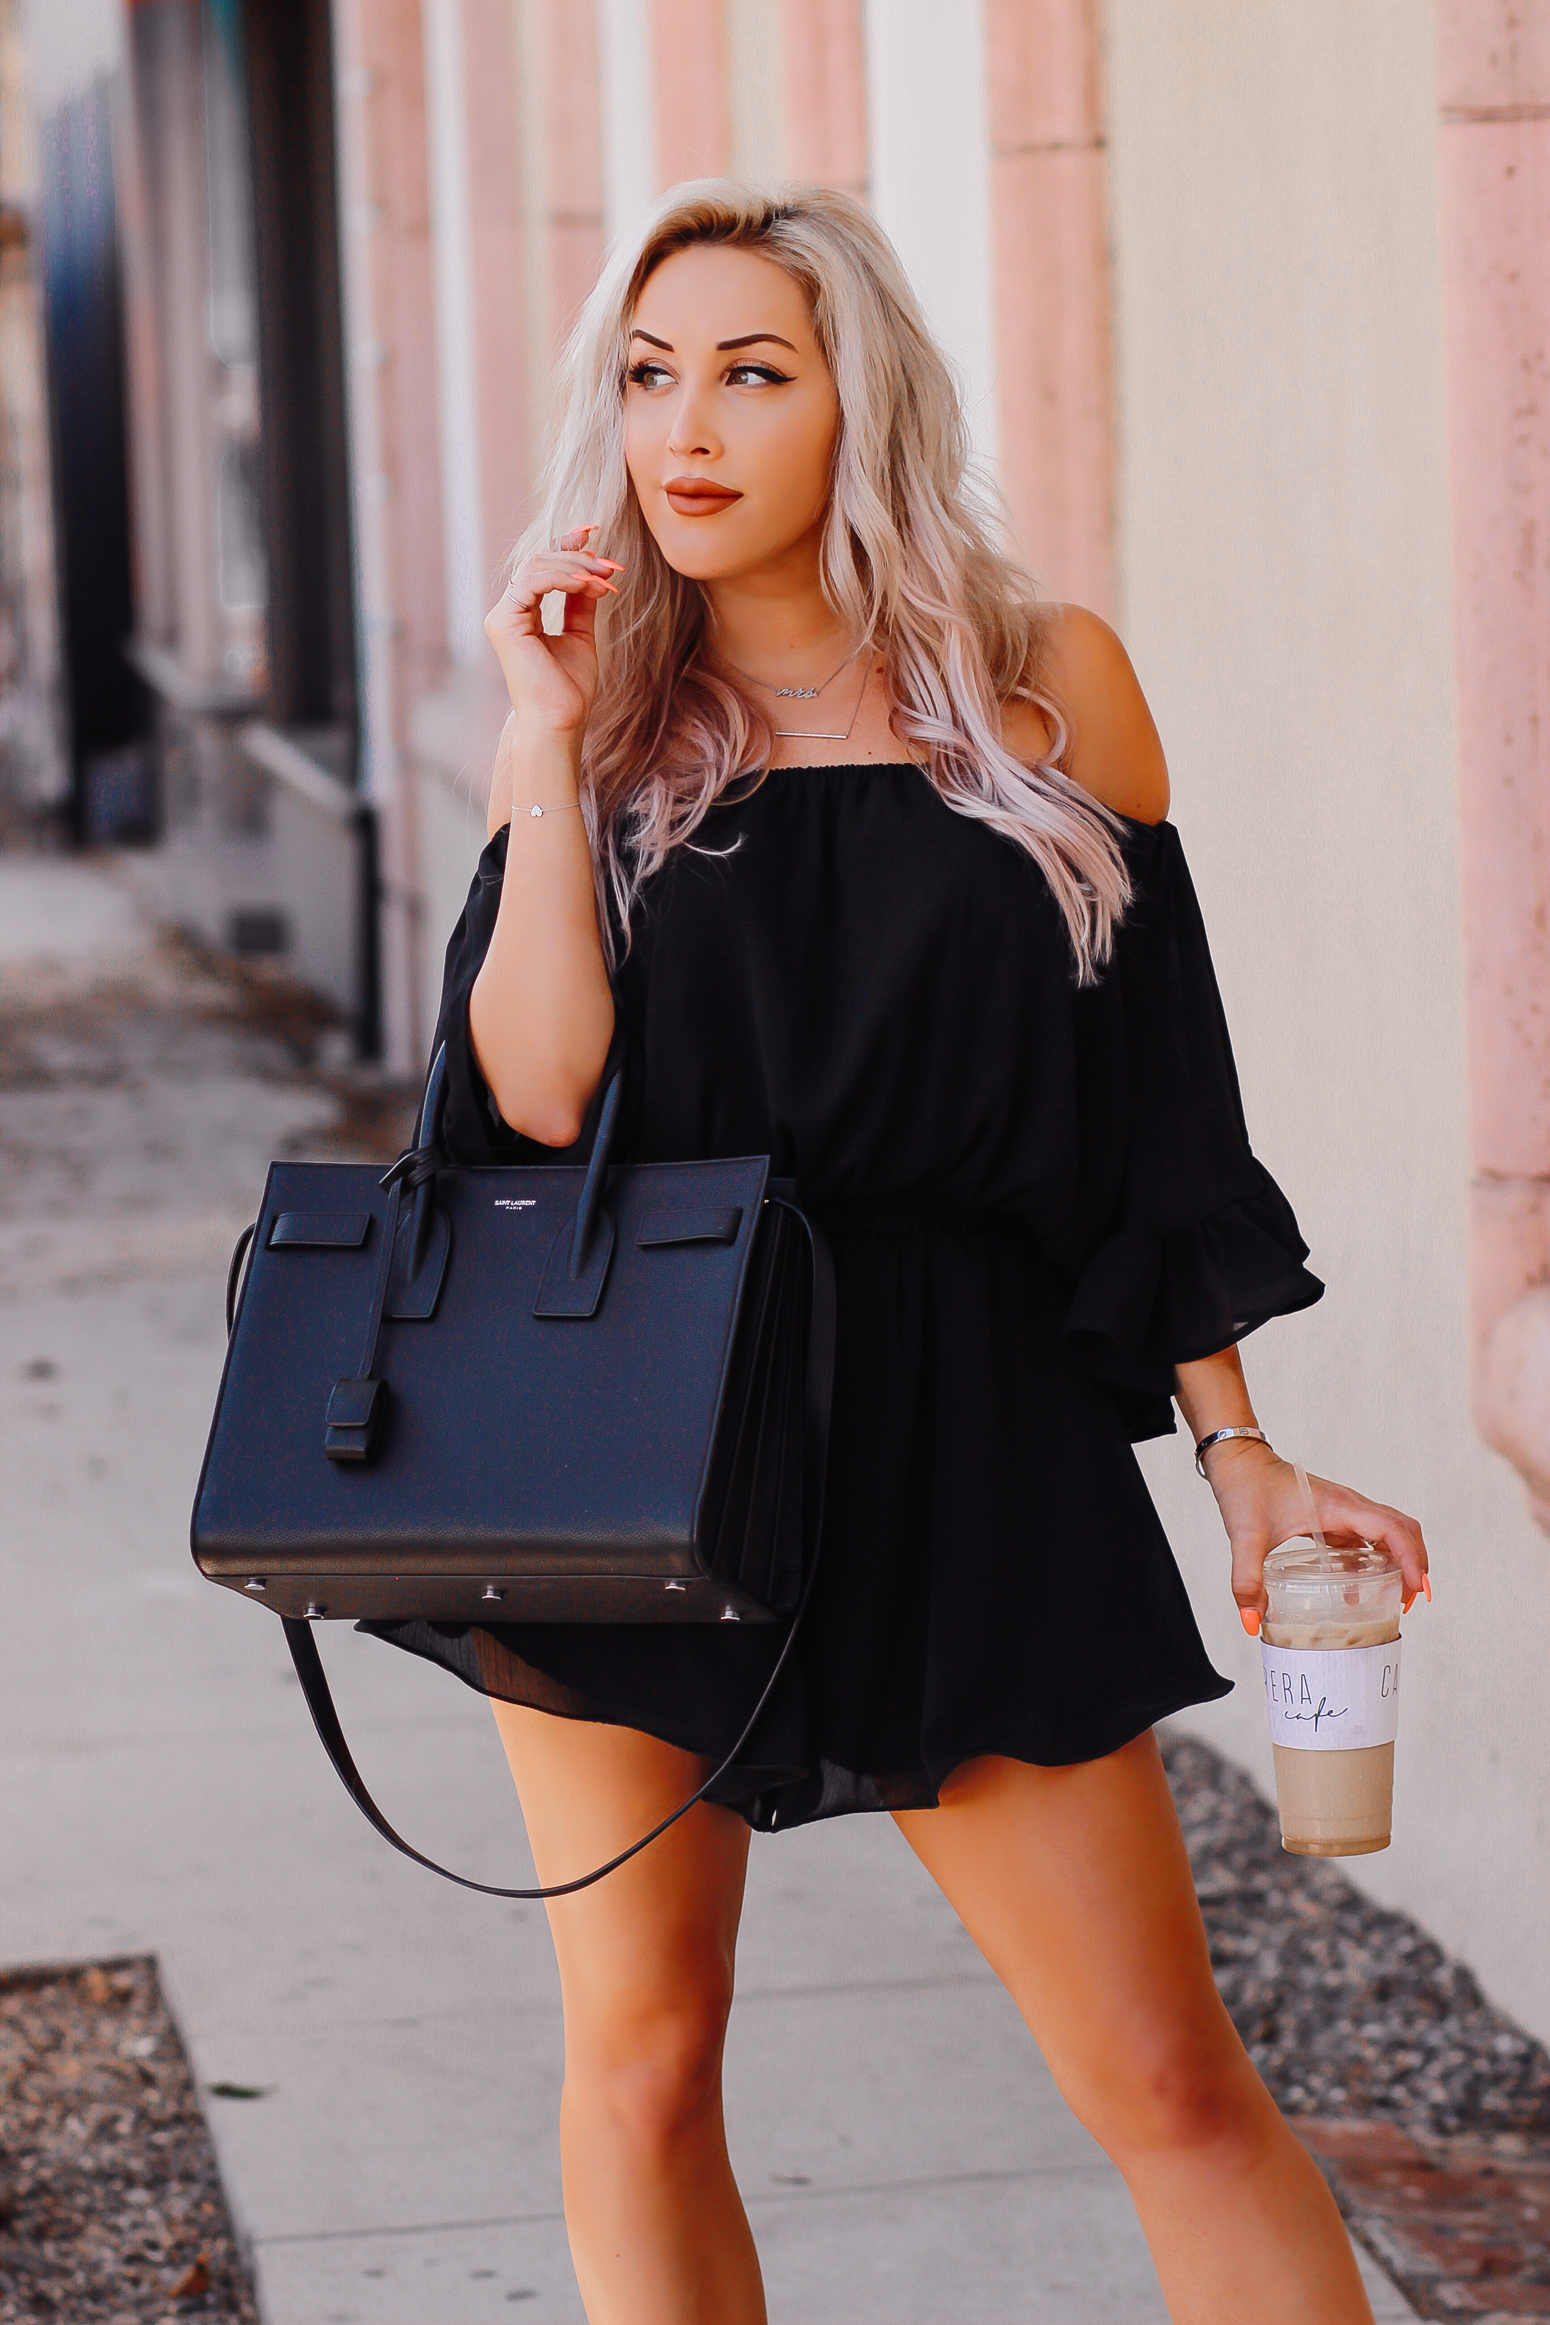 Blondie in the City | Black Airy Chiffon Romper @chicwish | Black YSL Bag | Chic Summer Style